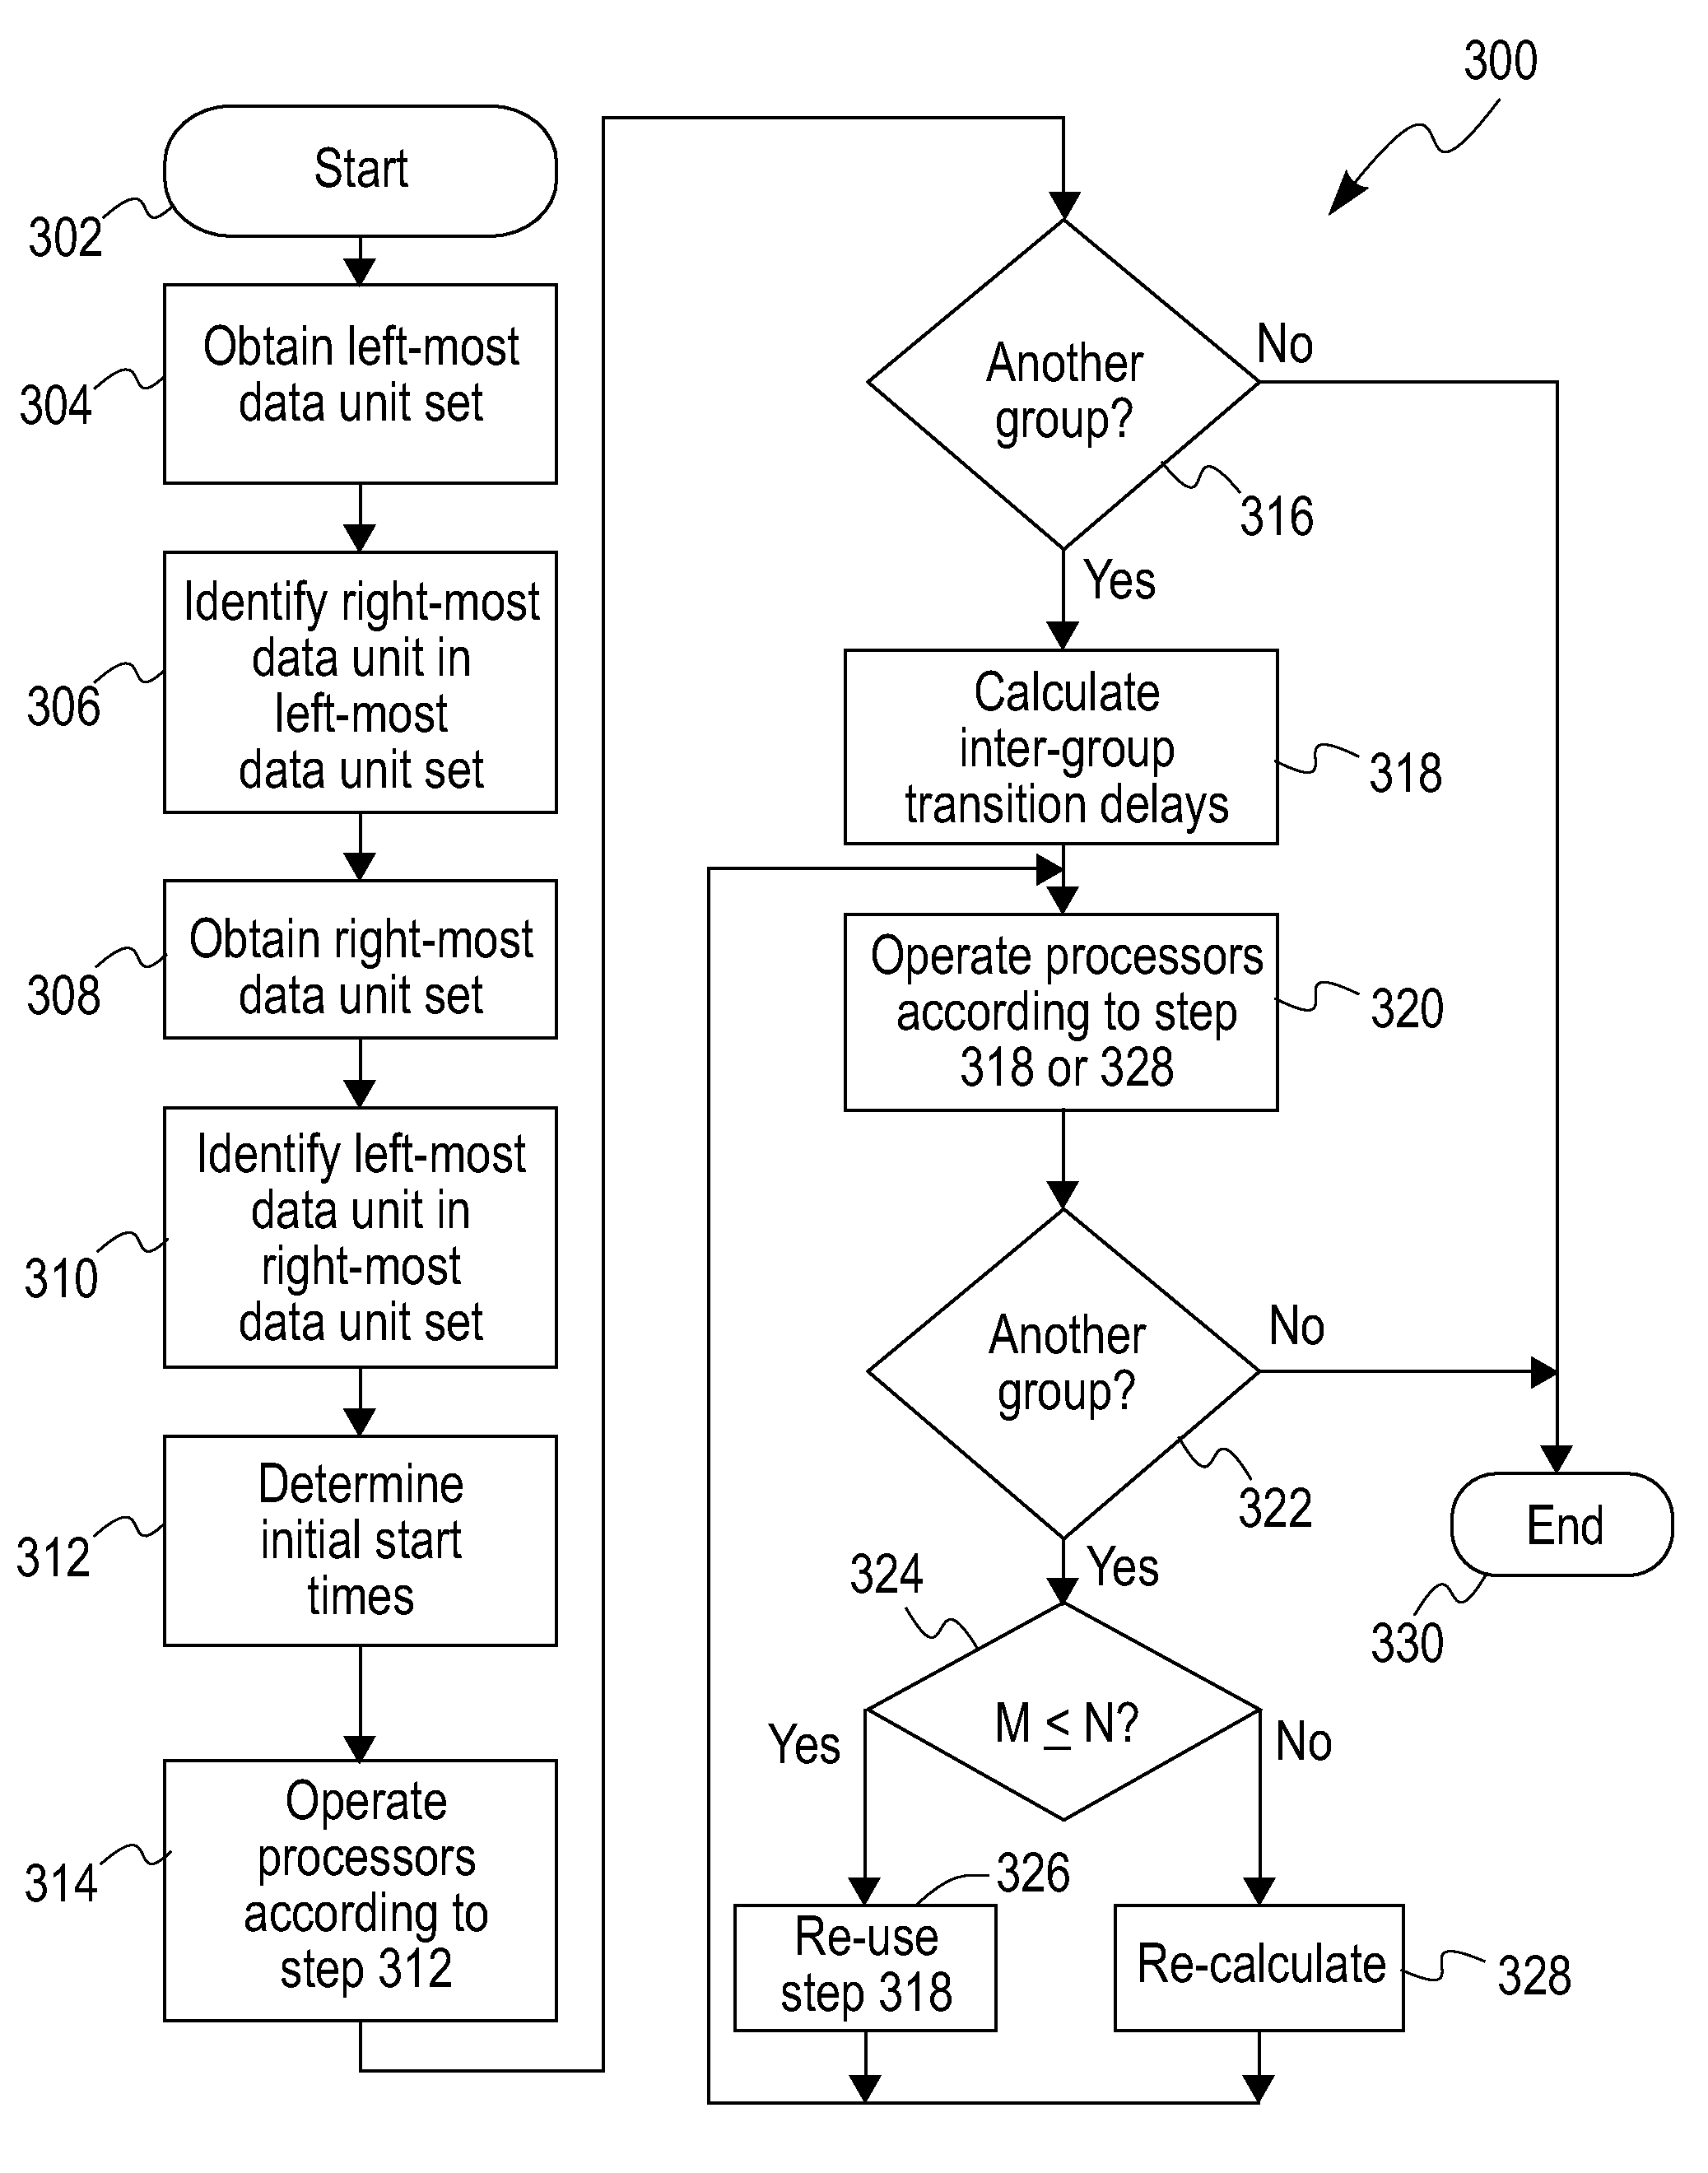 Synchronized parallel processing of rows of data with dependencies by determining start time for processors